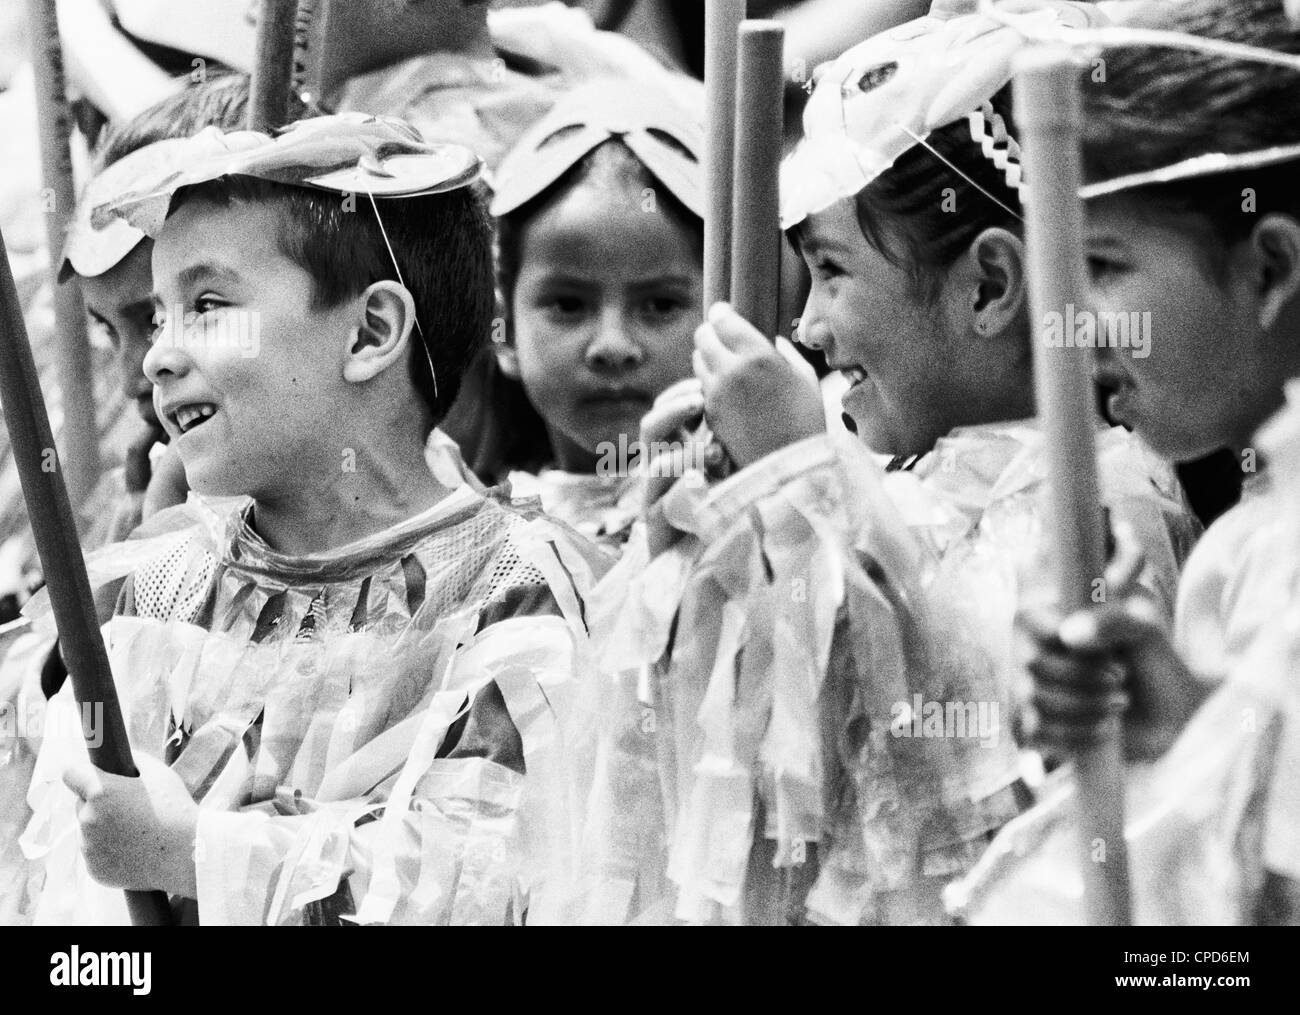 Children in costume during Public Christmas celebrations. Nobsa, Boyacá, Colombia, South America Stock Photo